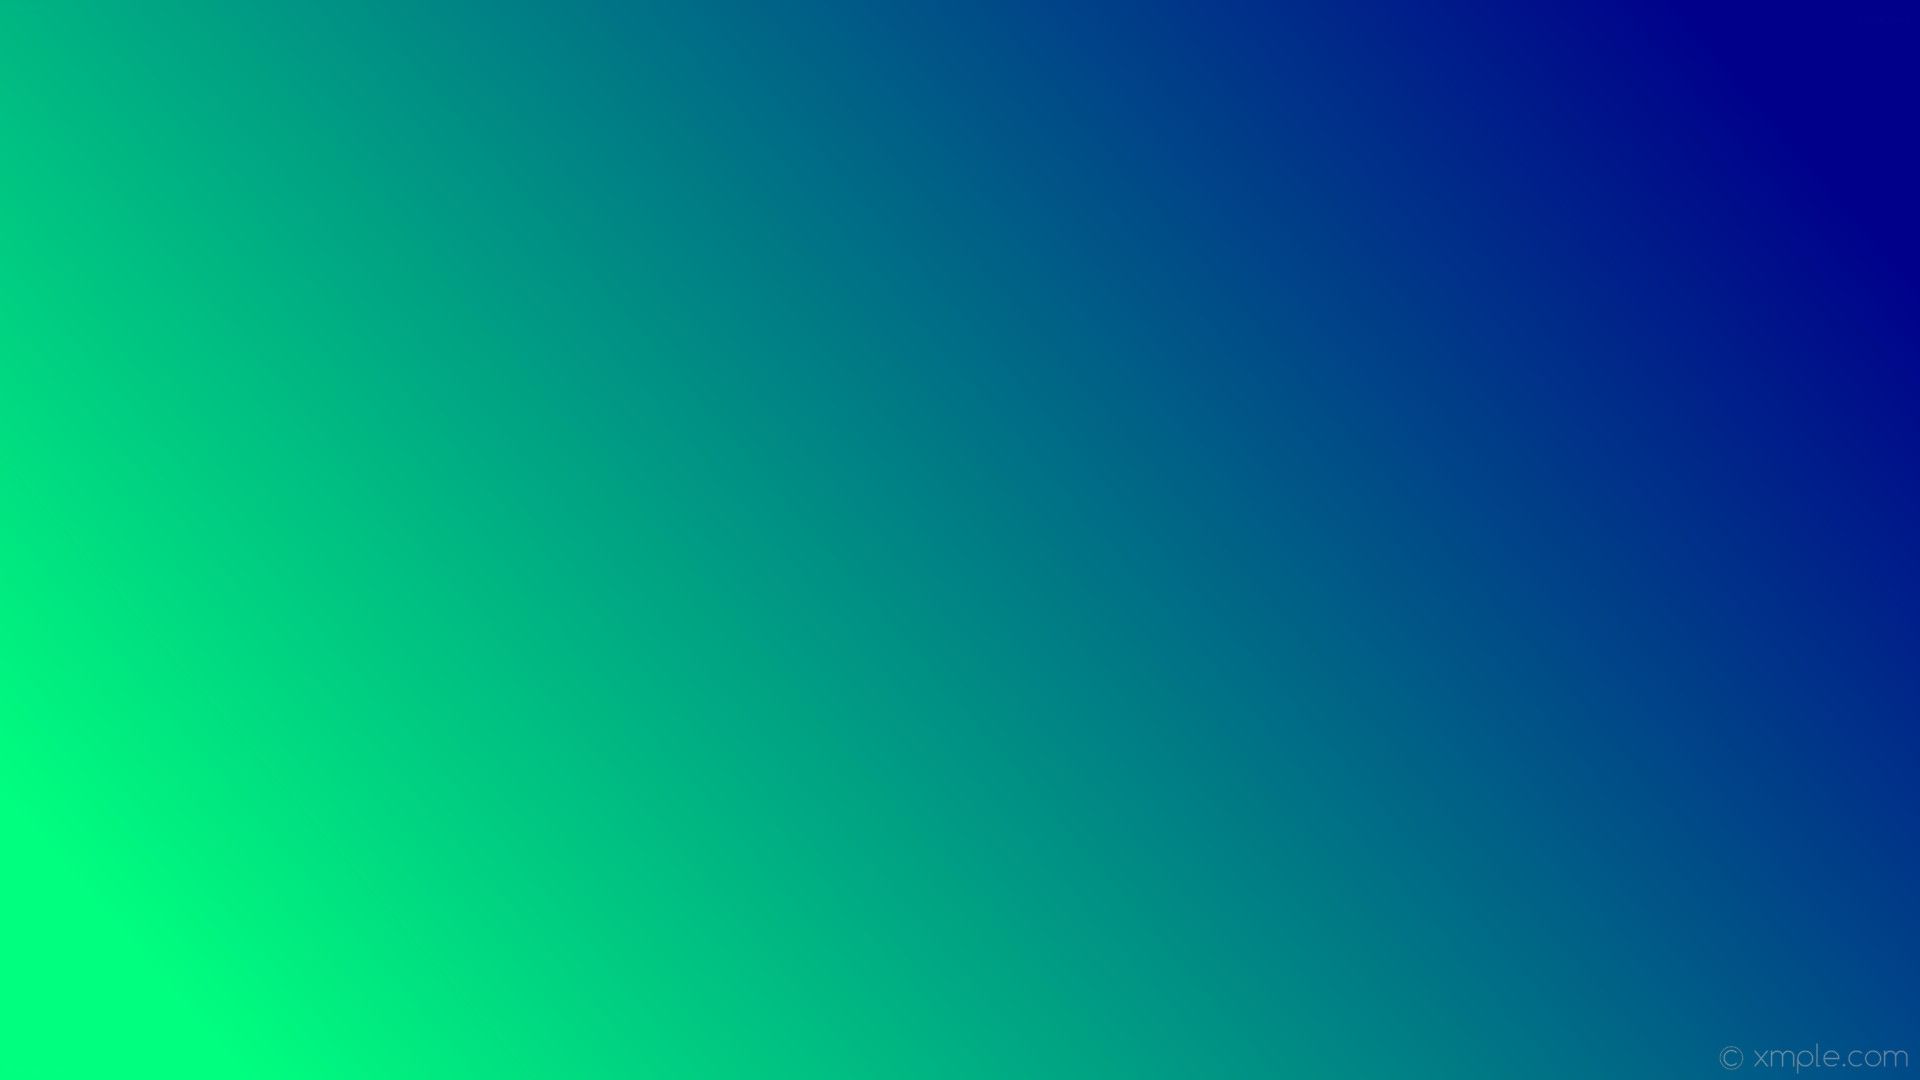 Green and Blue Gradient Wallpaper Free Green and Blue Gradient Background